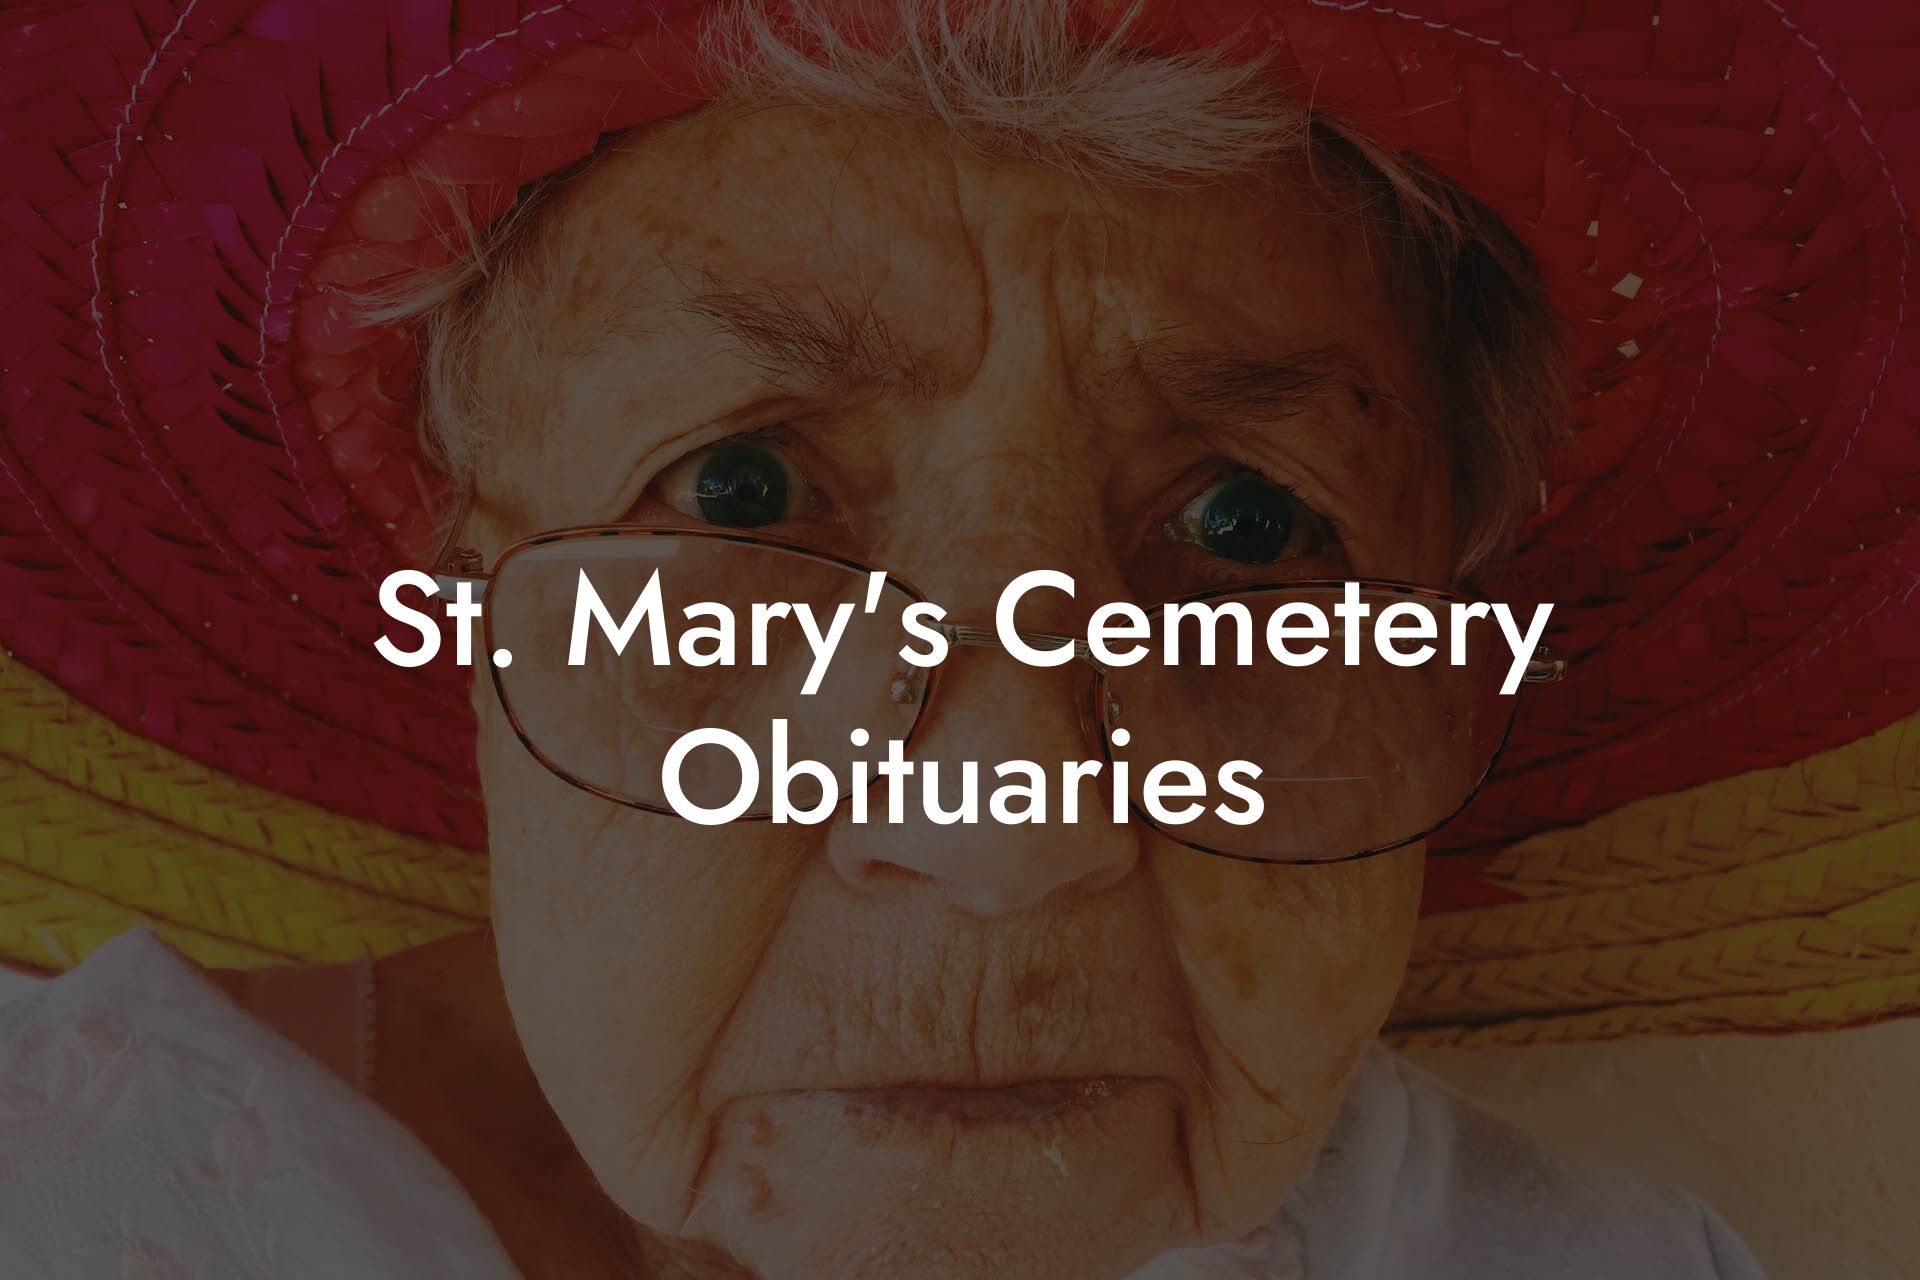 St. Mary's Cemetery Obituaries